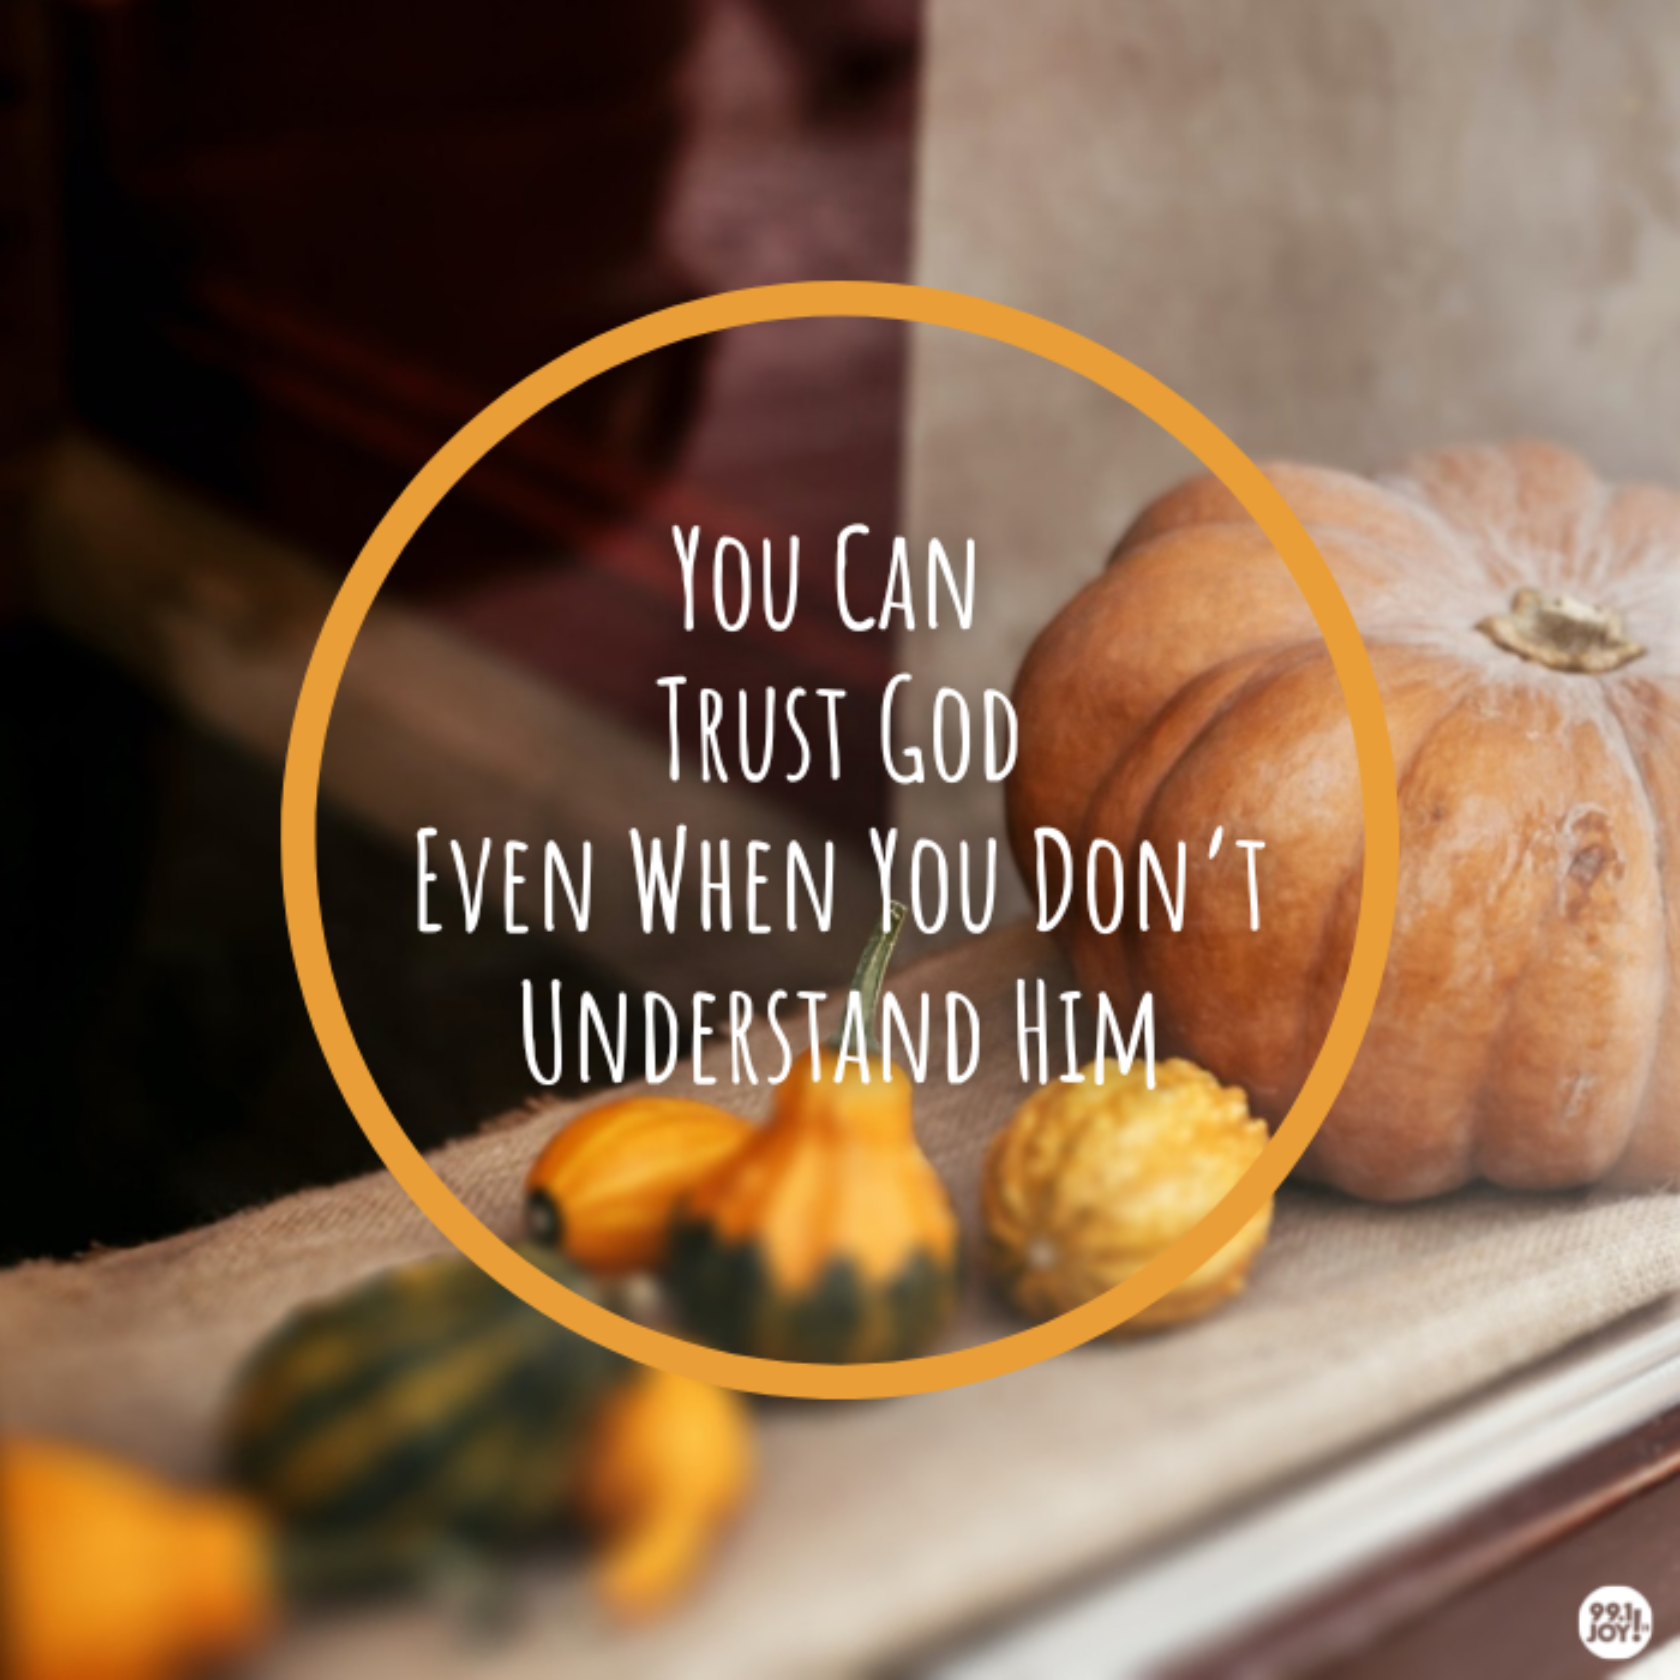 You Can Trust God Even When You Don’t Understand Him